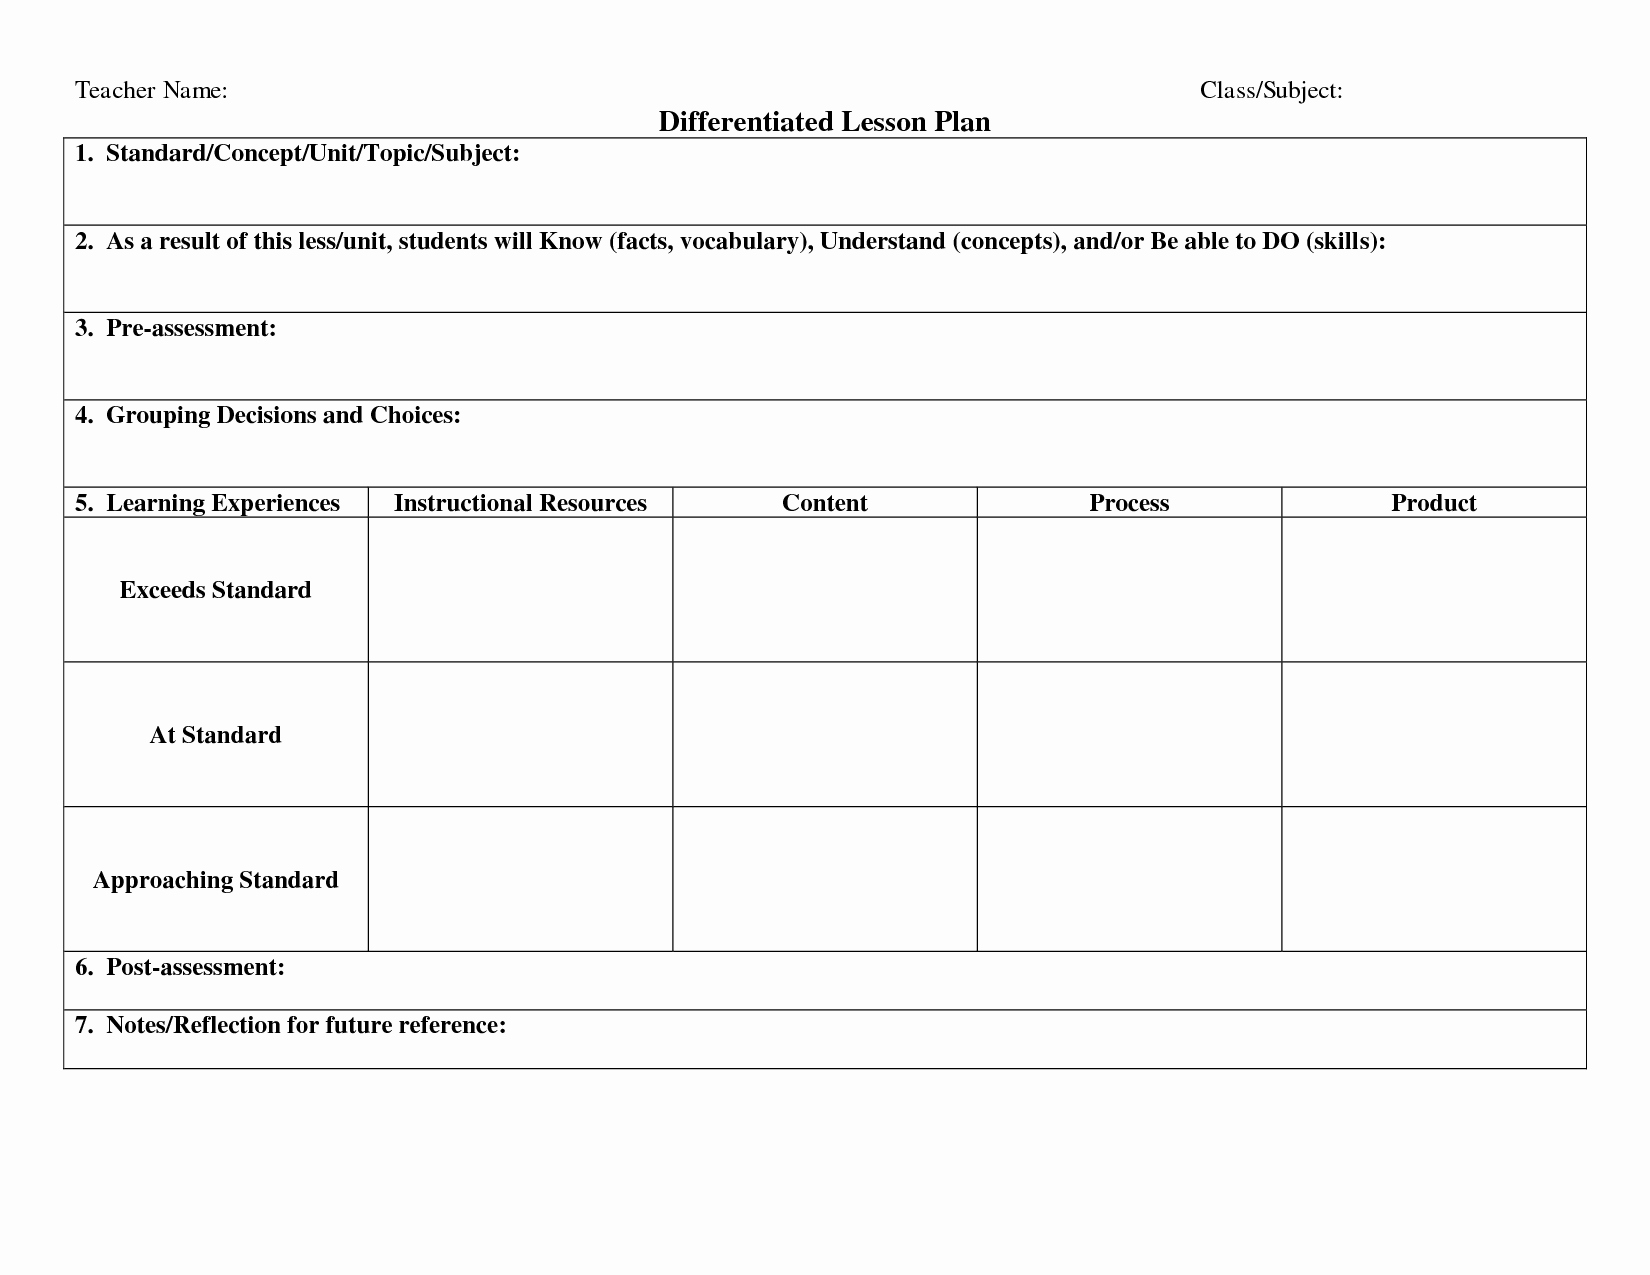 Tiered Lesson Plan Template Awesome Ppp Lesson Plan Template Simple Cafeaabfd